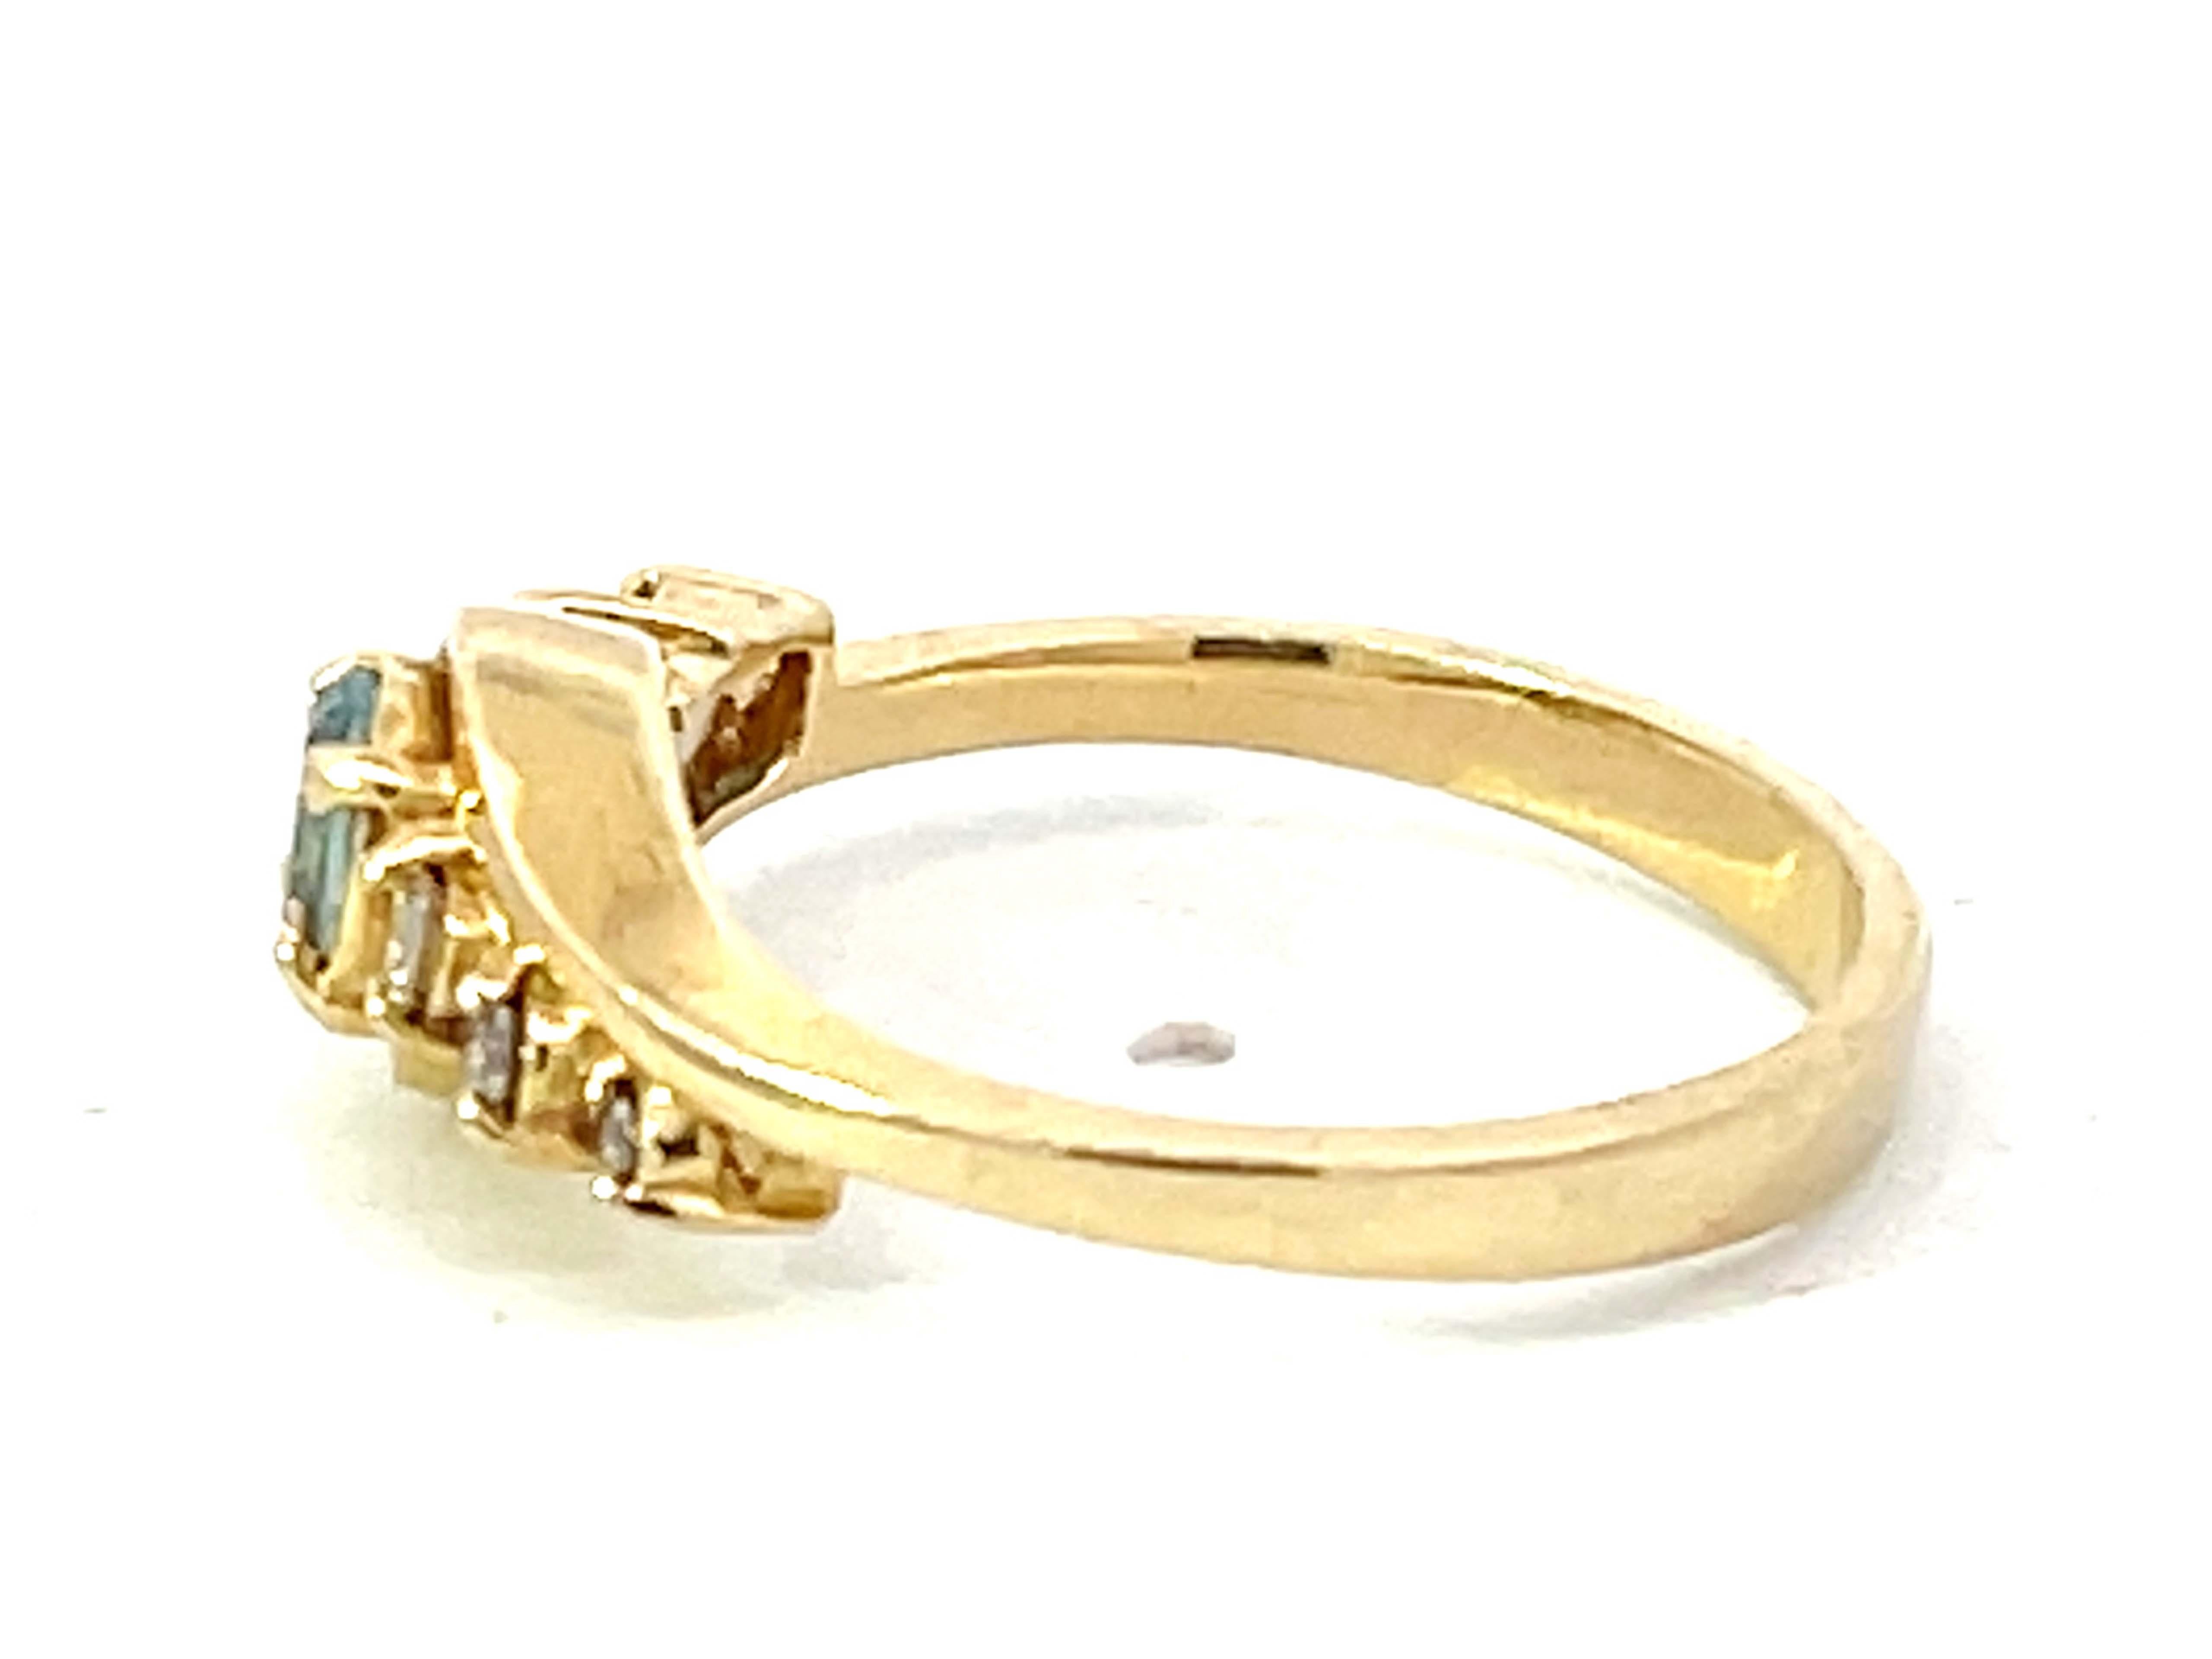 Oval Aquamarine and Diamond Ring in 14k Yellow Gold For Sale 1